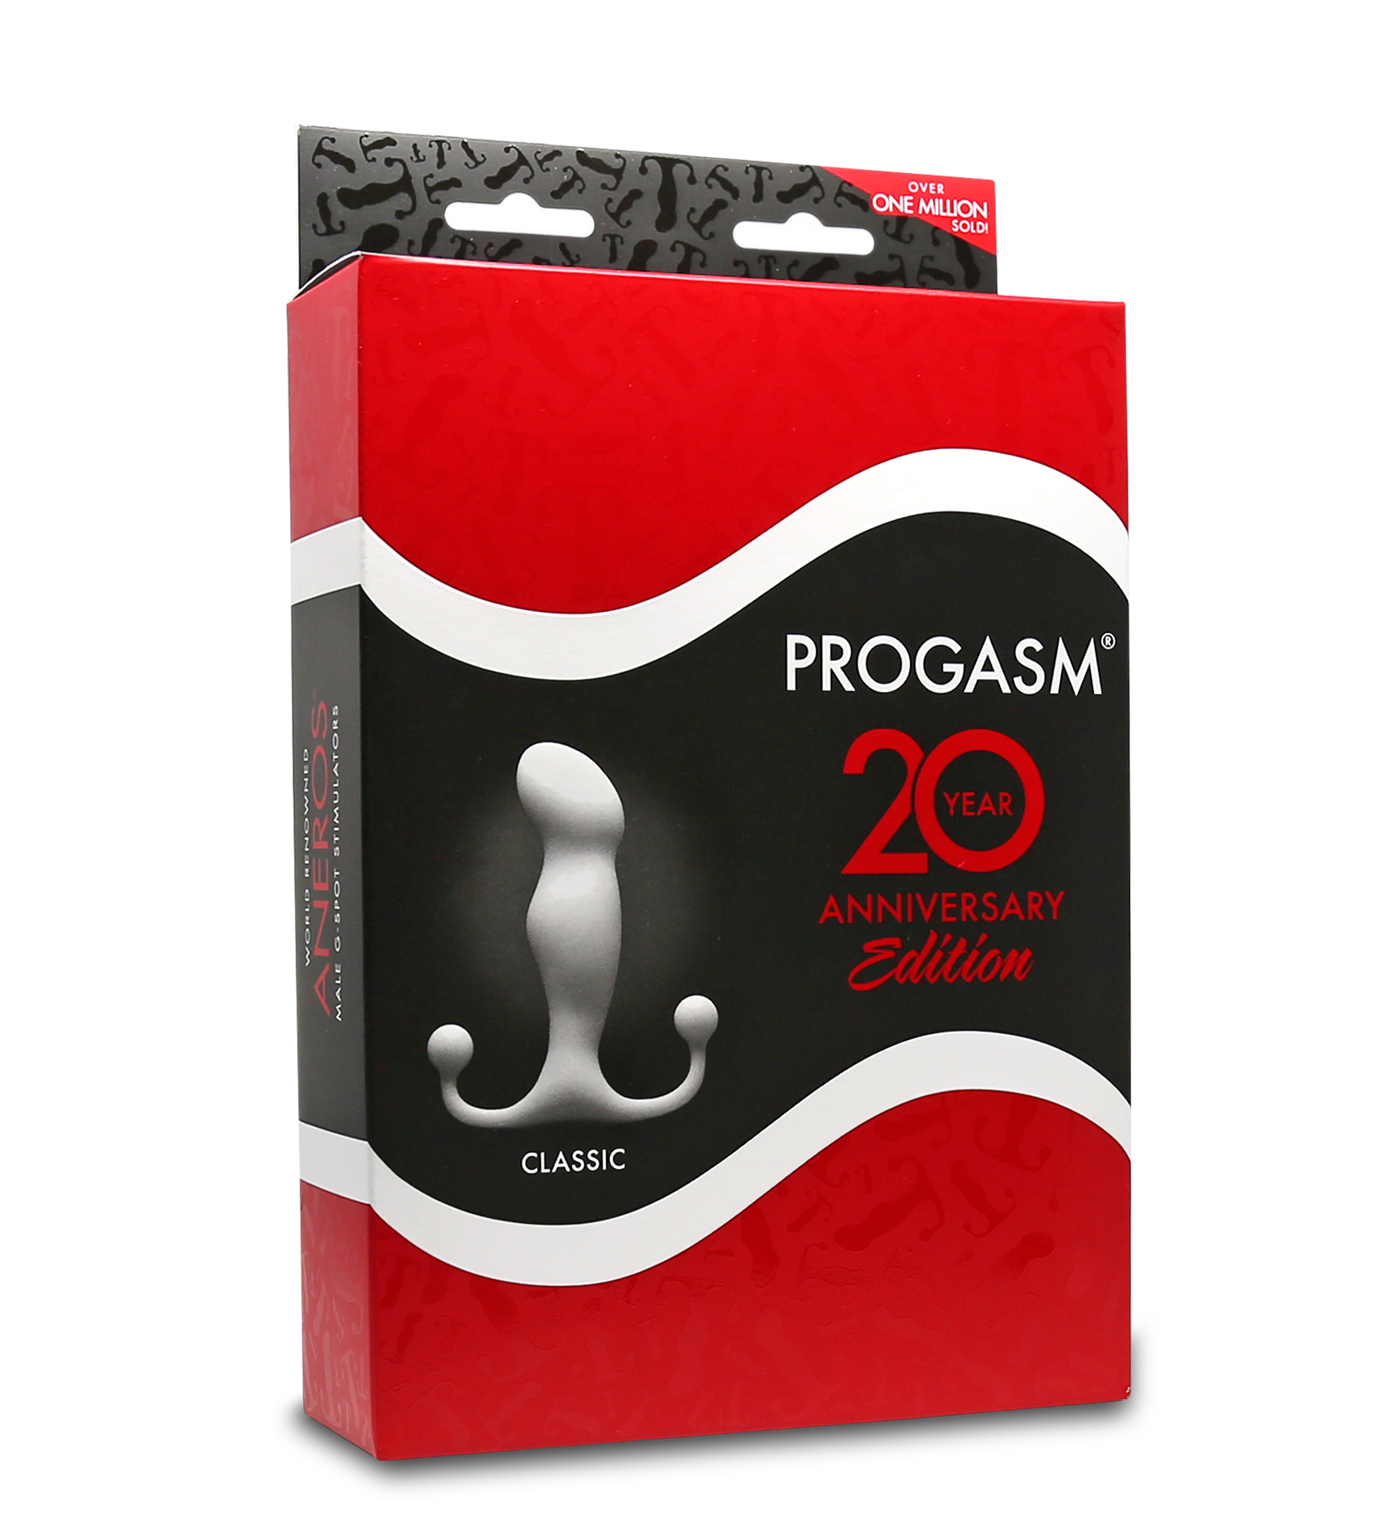 Progasm Classic Packaging